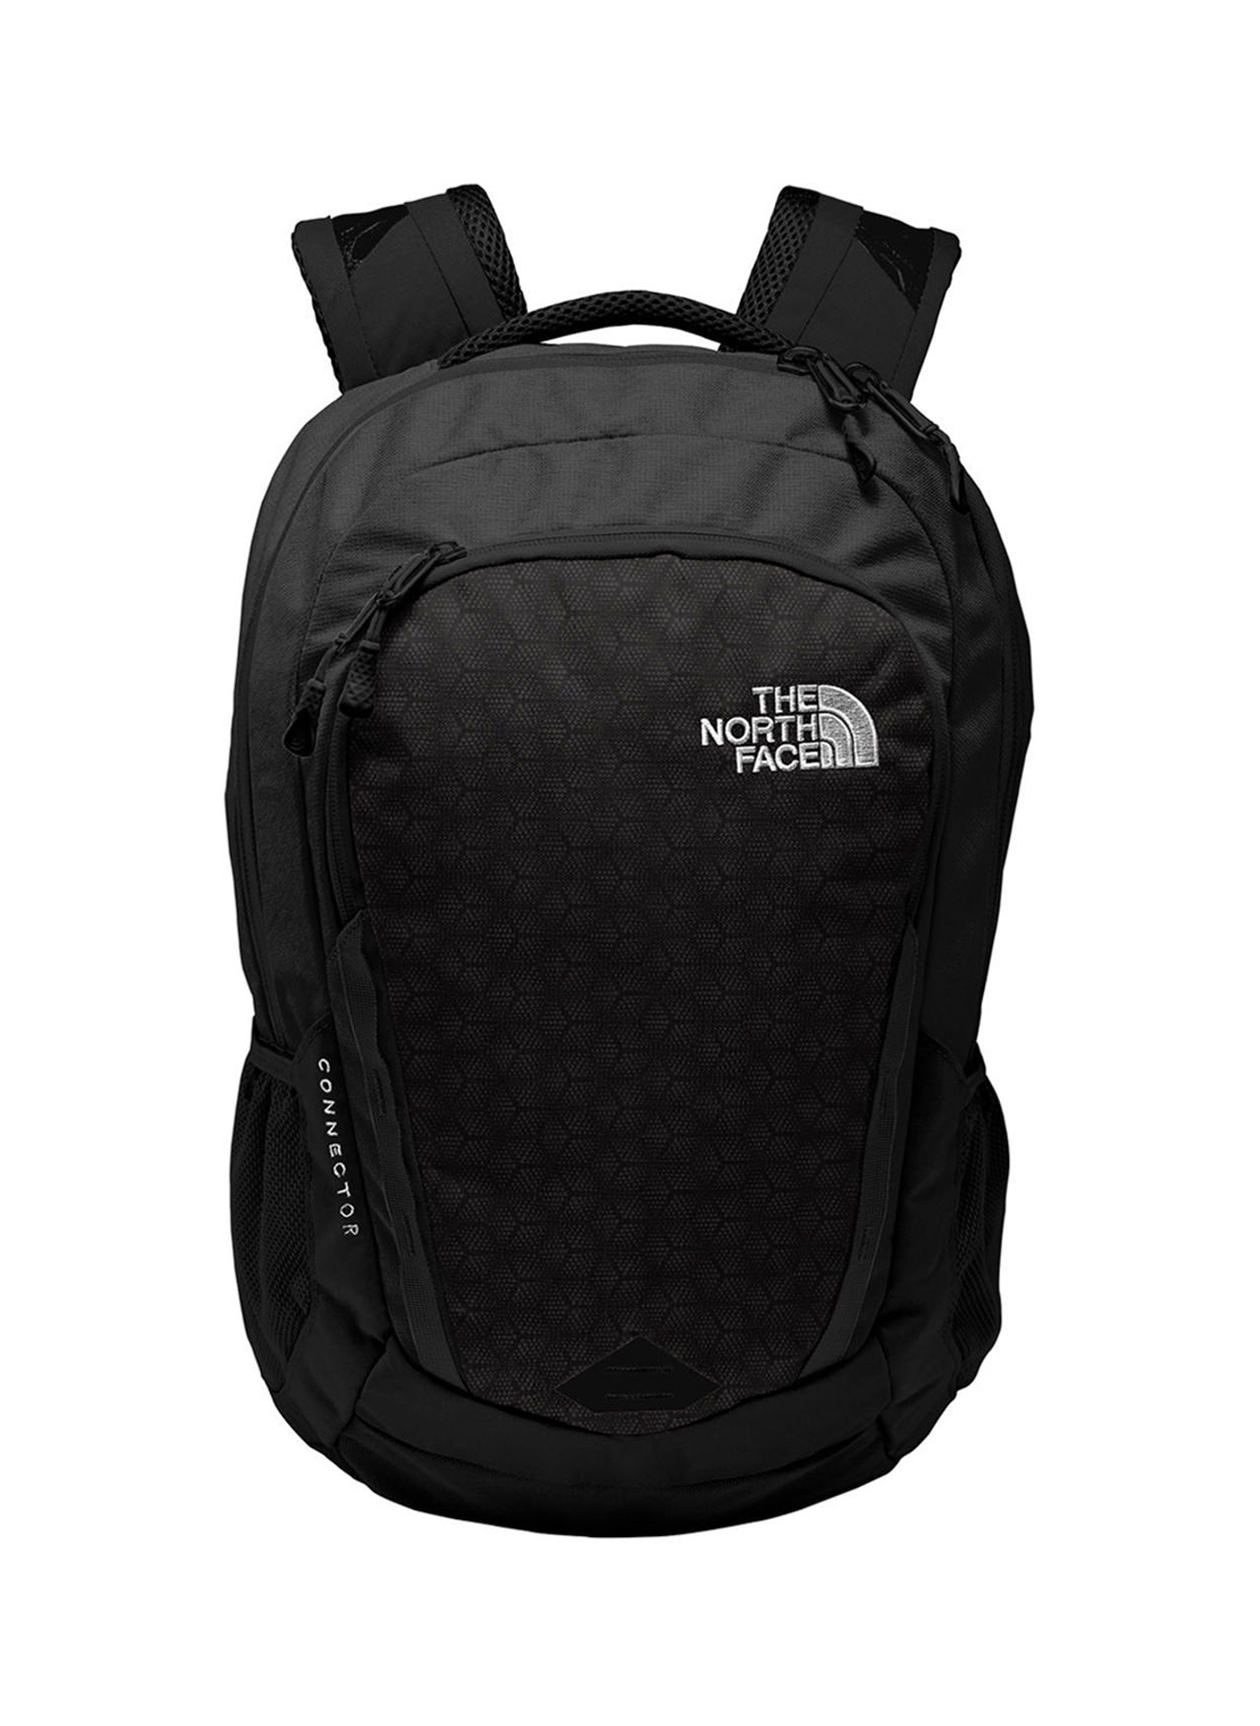 THE NORTH FACE Backpack Novelty BC FUSE BOX 30L YT NM81939 From Japan New |  eBay